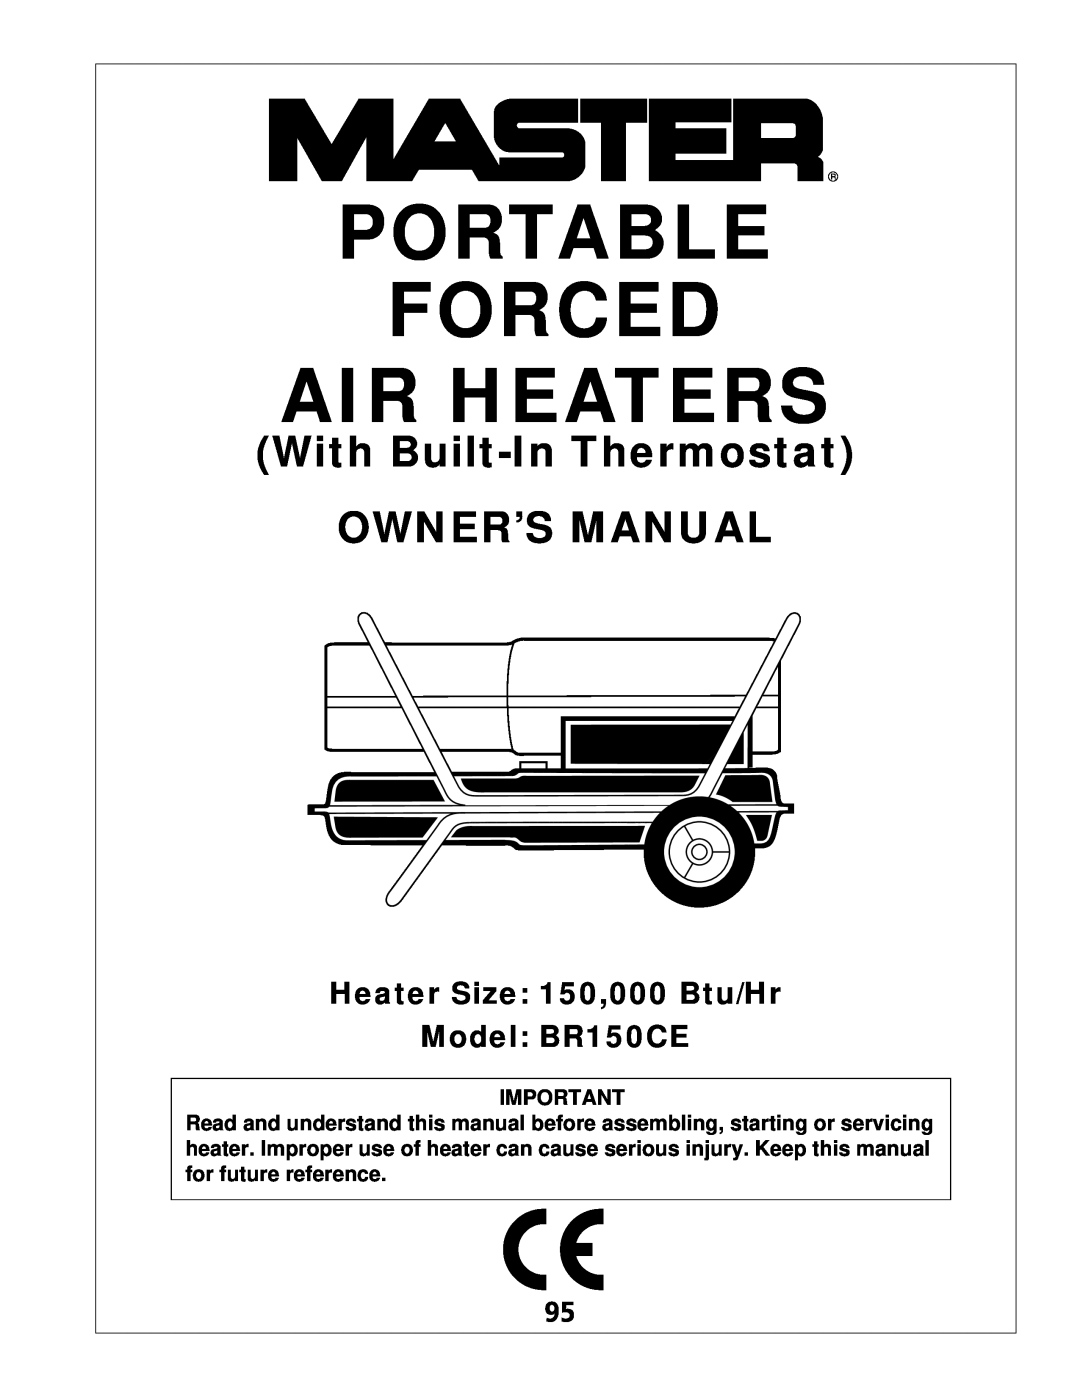 Master Lock owner manual Heater Size 150,000 Btu/Hr Model BR150CE, Portable Forced Air Heaters 